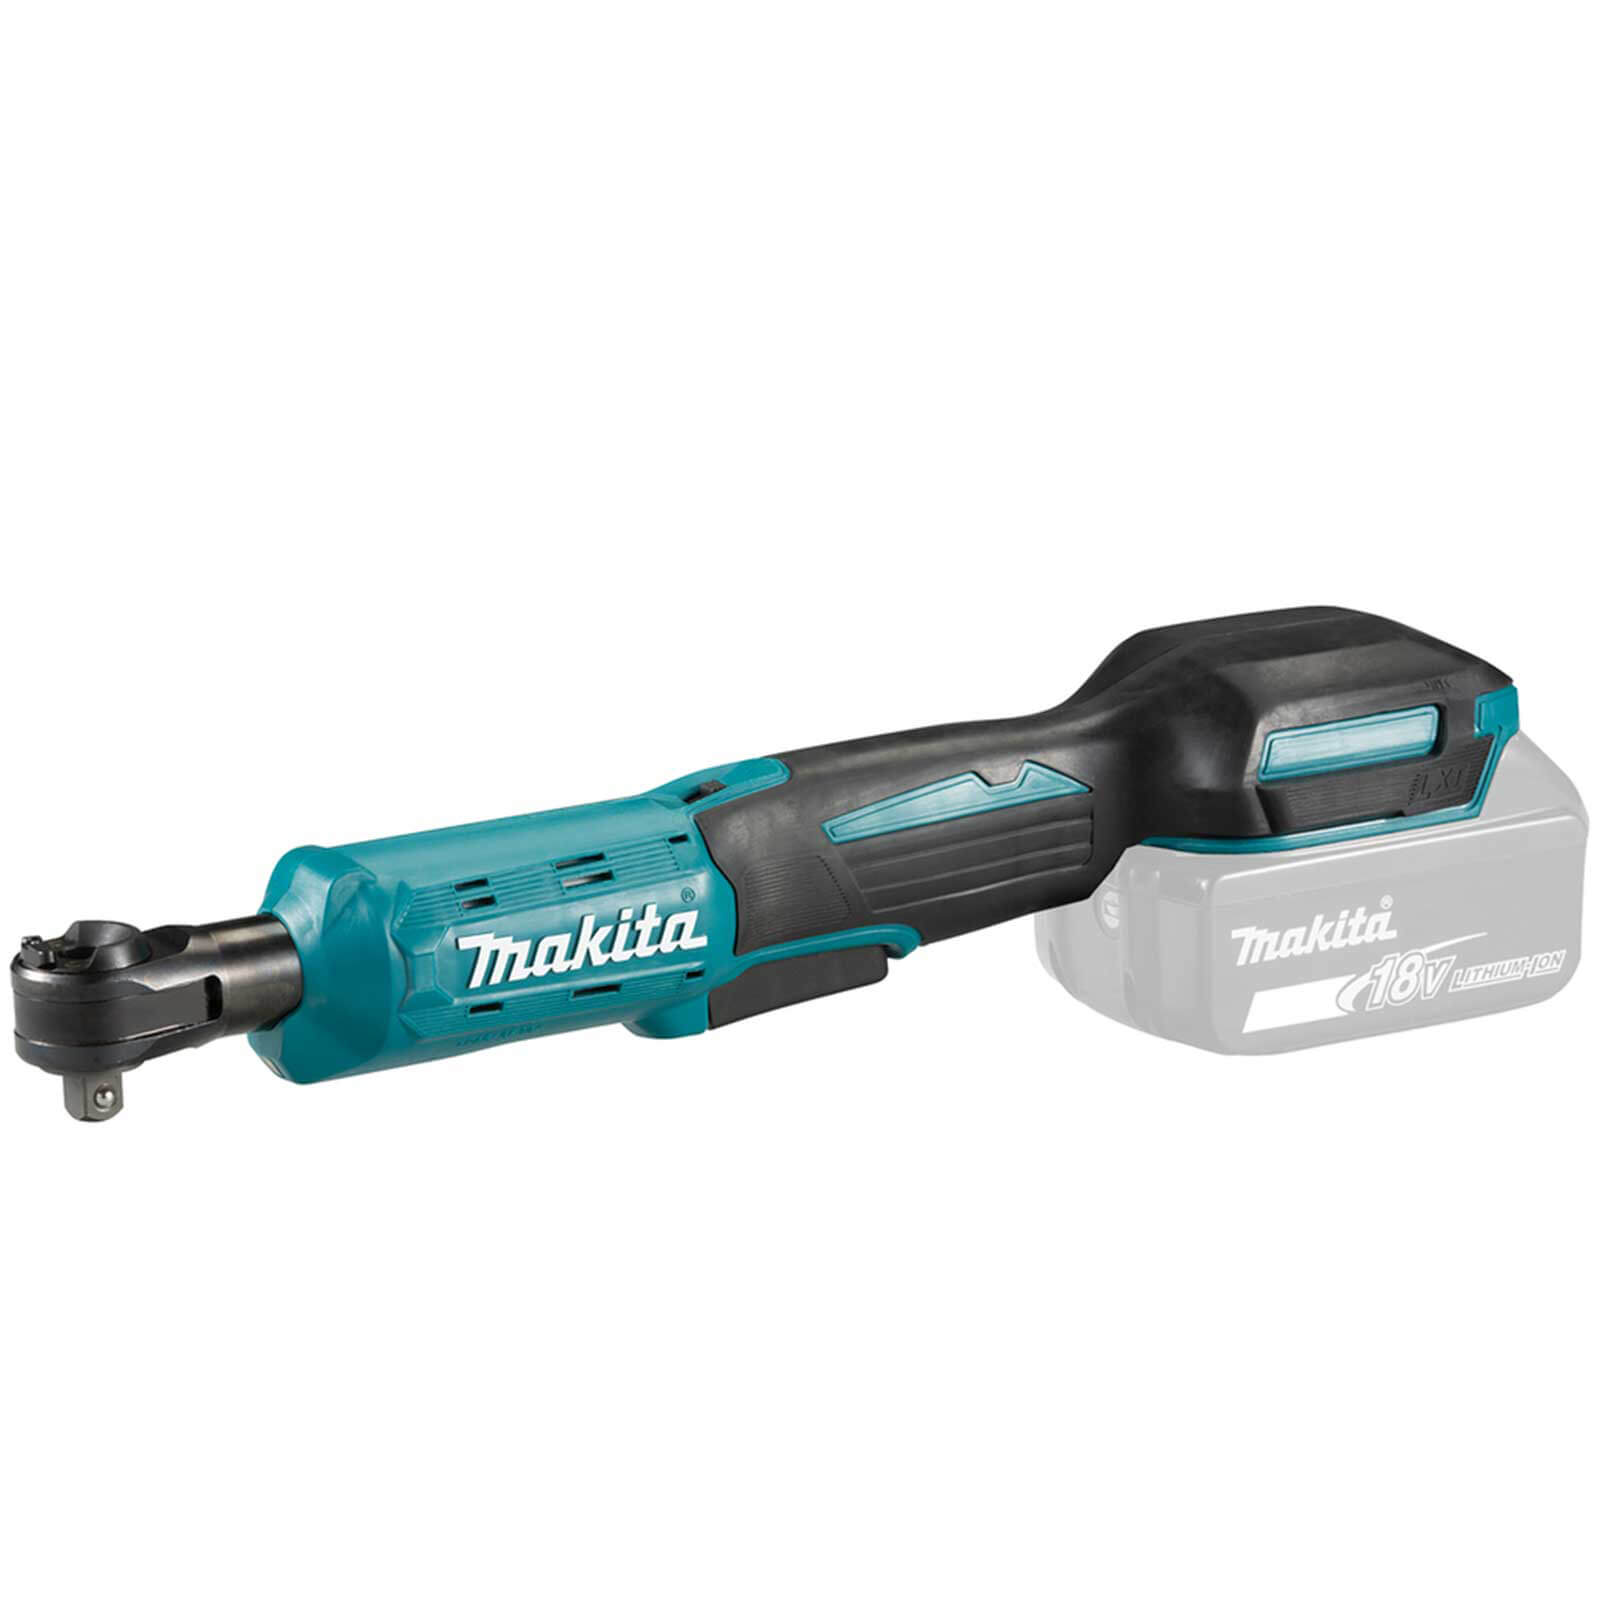 Photo of Makita Dwr180 18v Lxt Cordless Ratchet Wrench No Batteries No Charger Bag